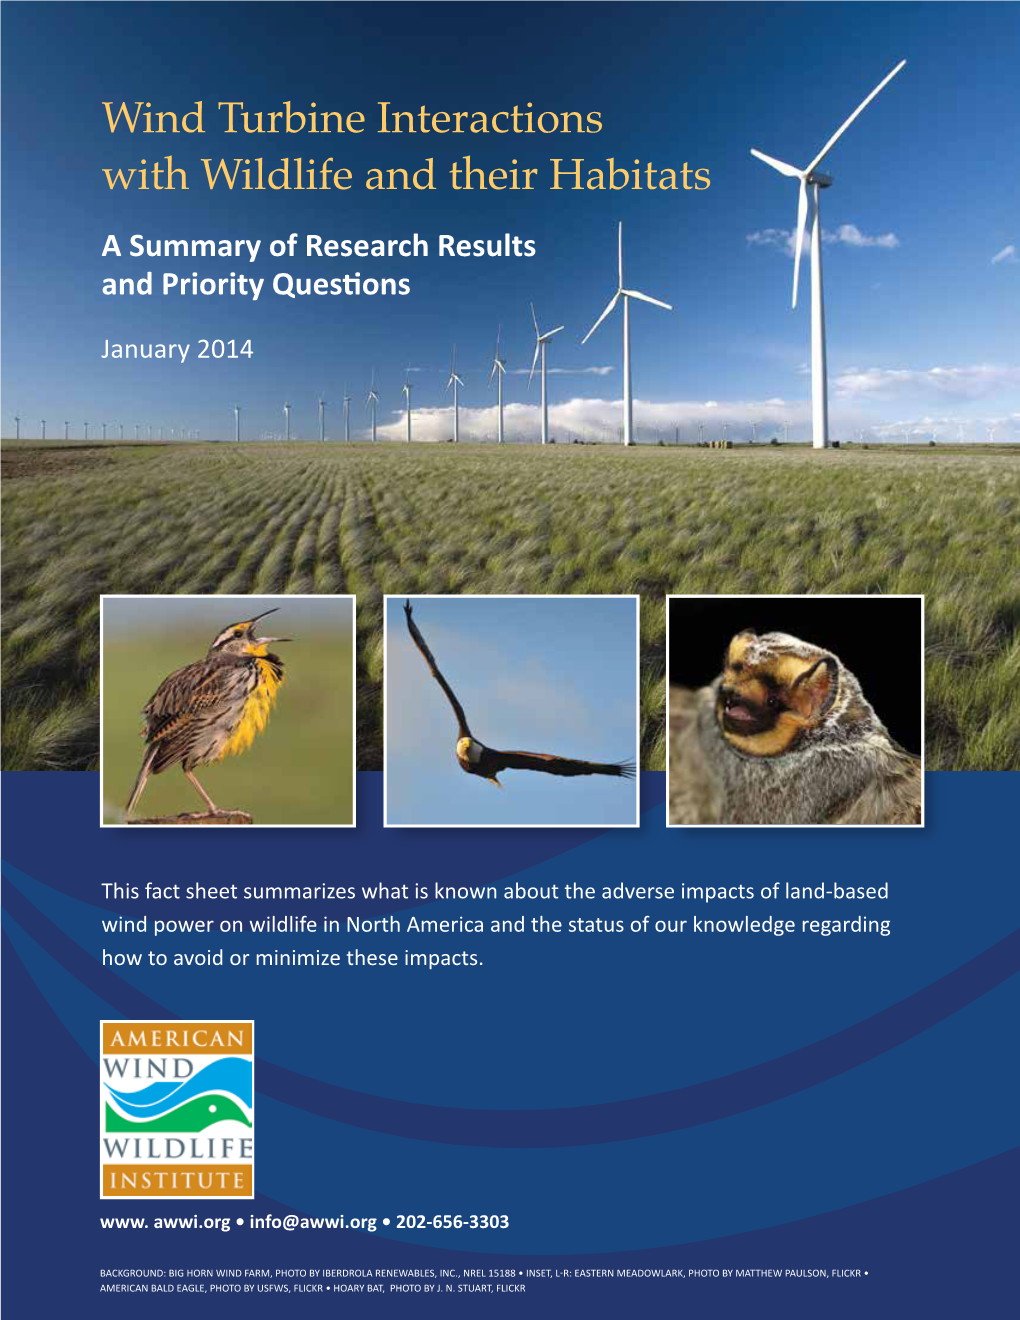 Wind Turbine Interactions with Wildlife and Their Habitats a Summary of Research Results and Priority Questions